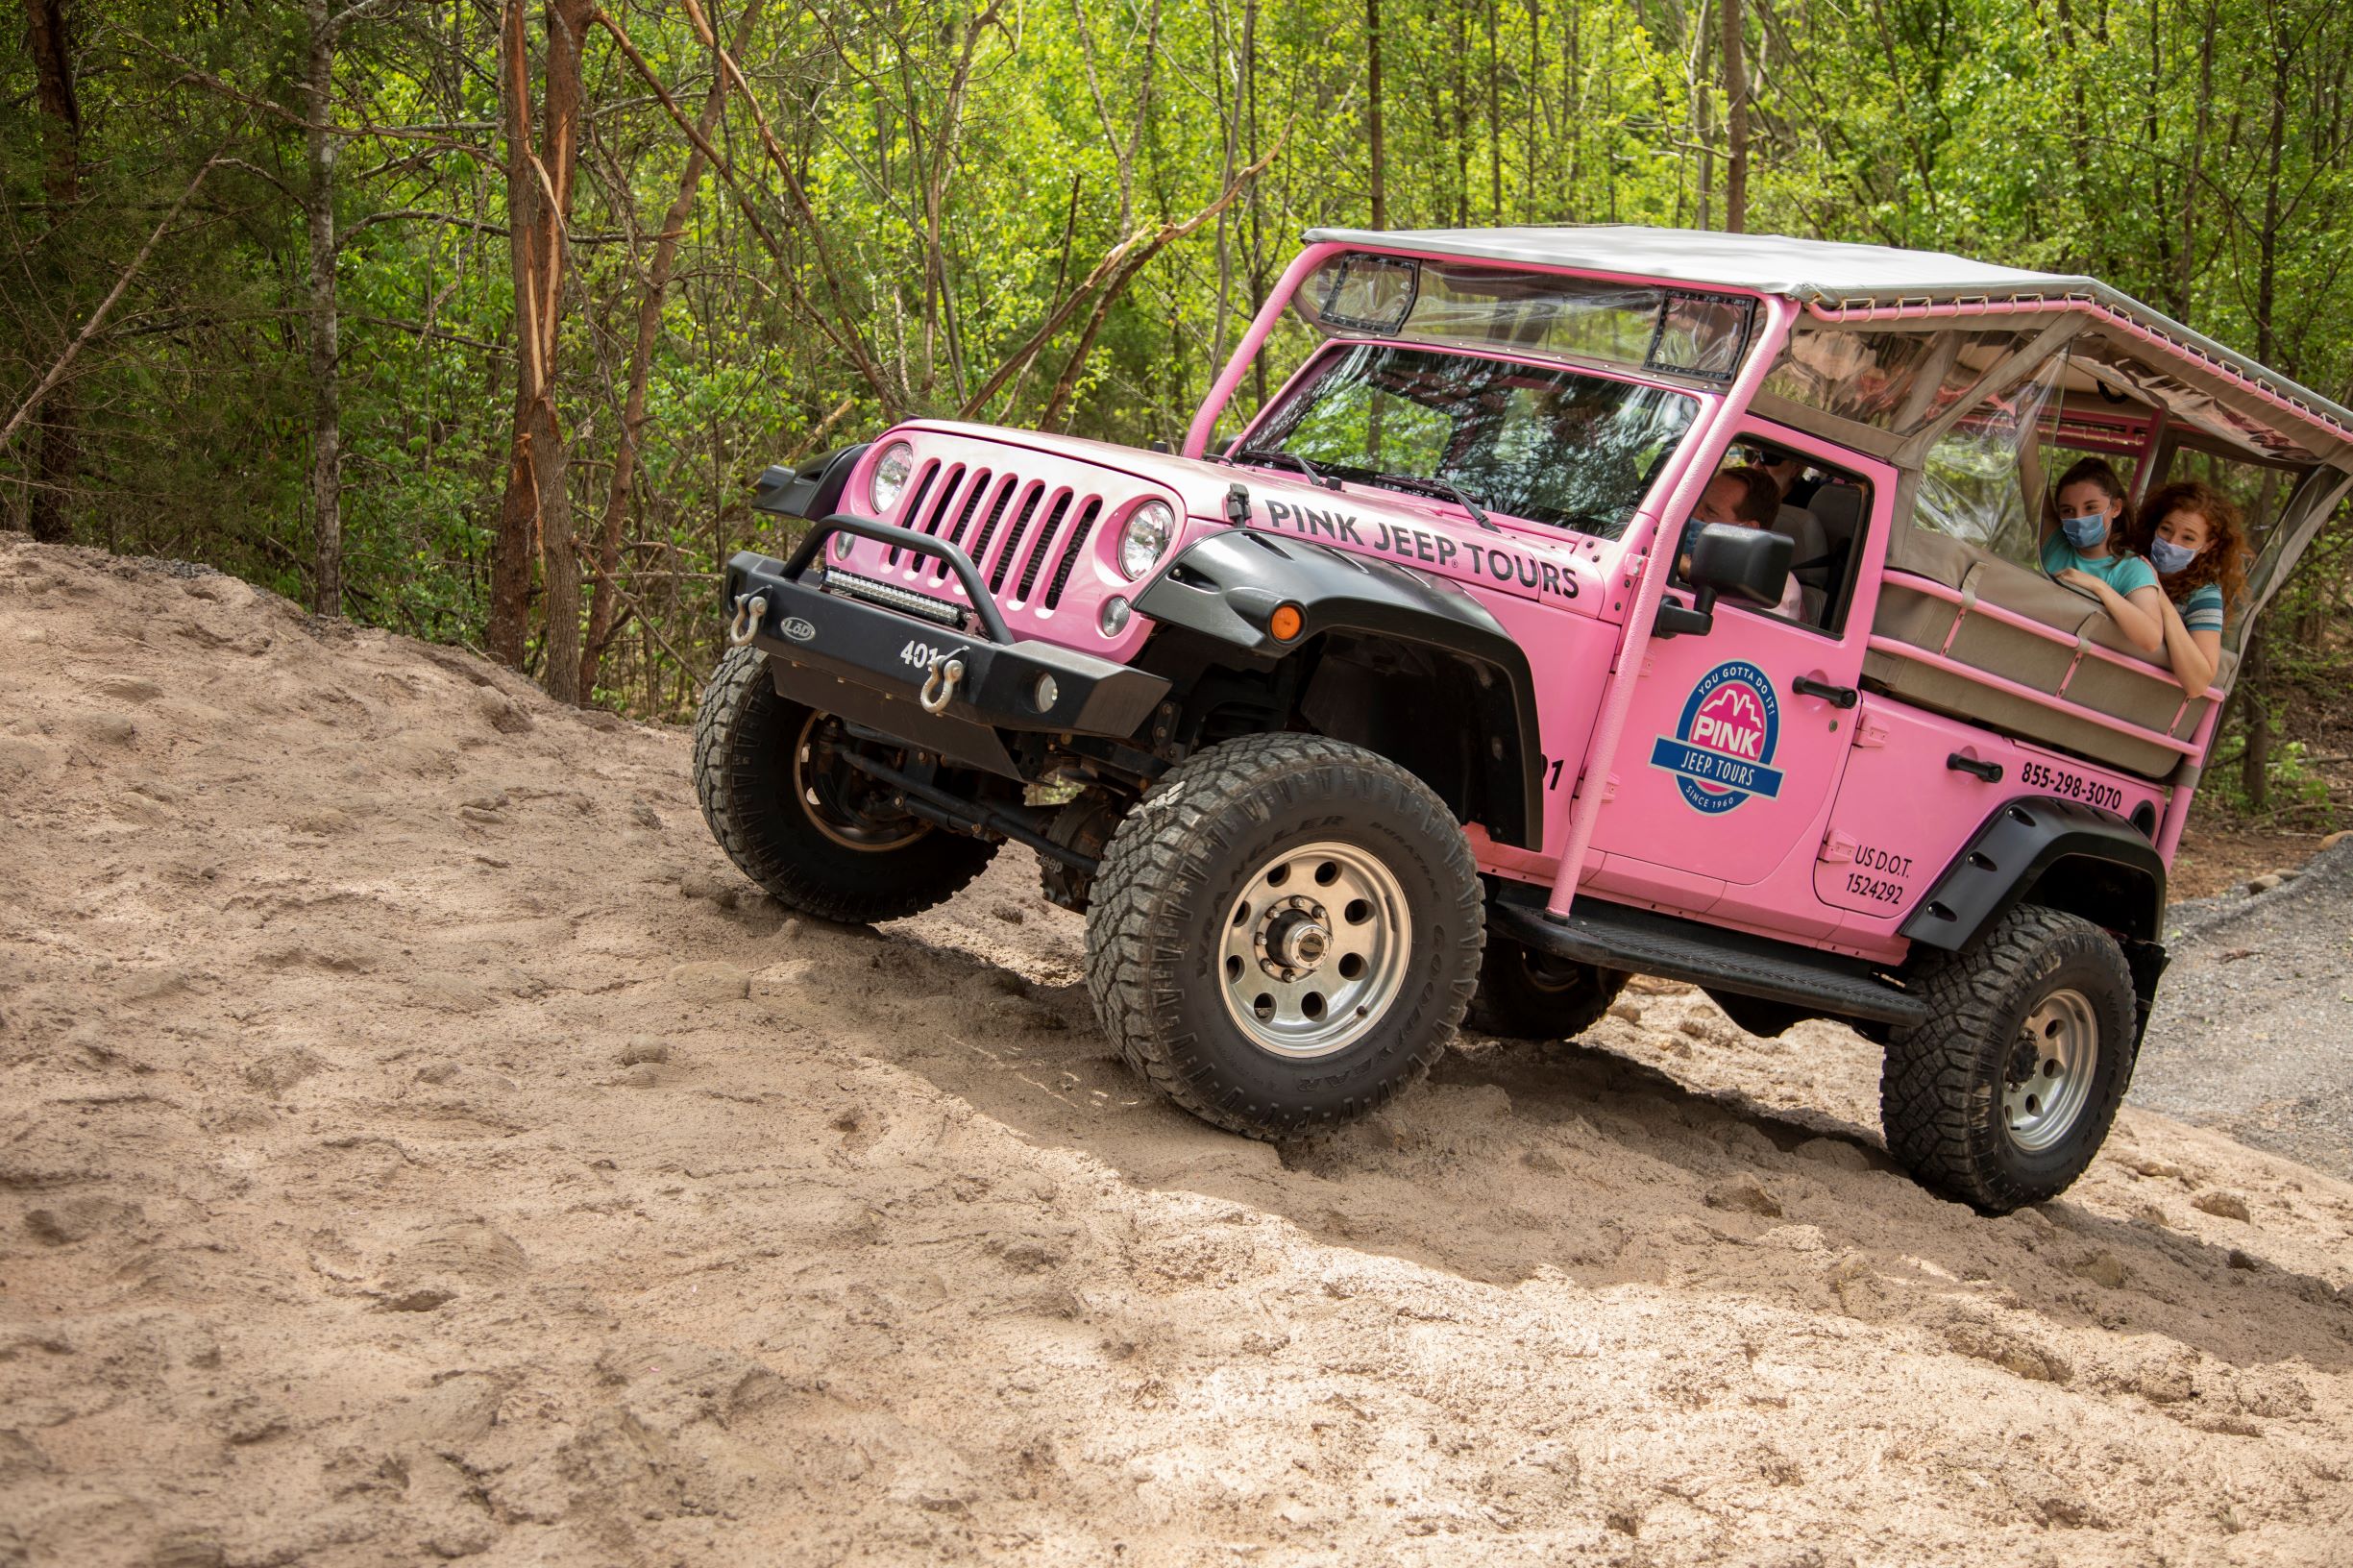 All excursions leave from the PINK® Jeep® Tours local headquarters in the heart of Sedona, AZ and in Pigeon Forge, TN at its NEW location in the Smoky Mountains at Parkway & Wears Valley Rd.